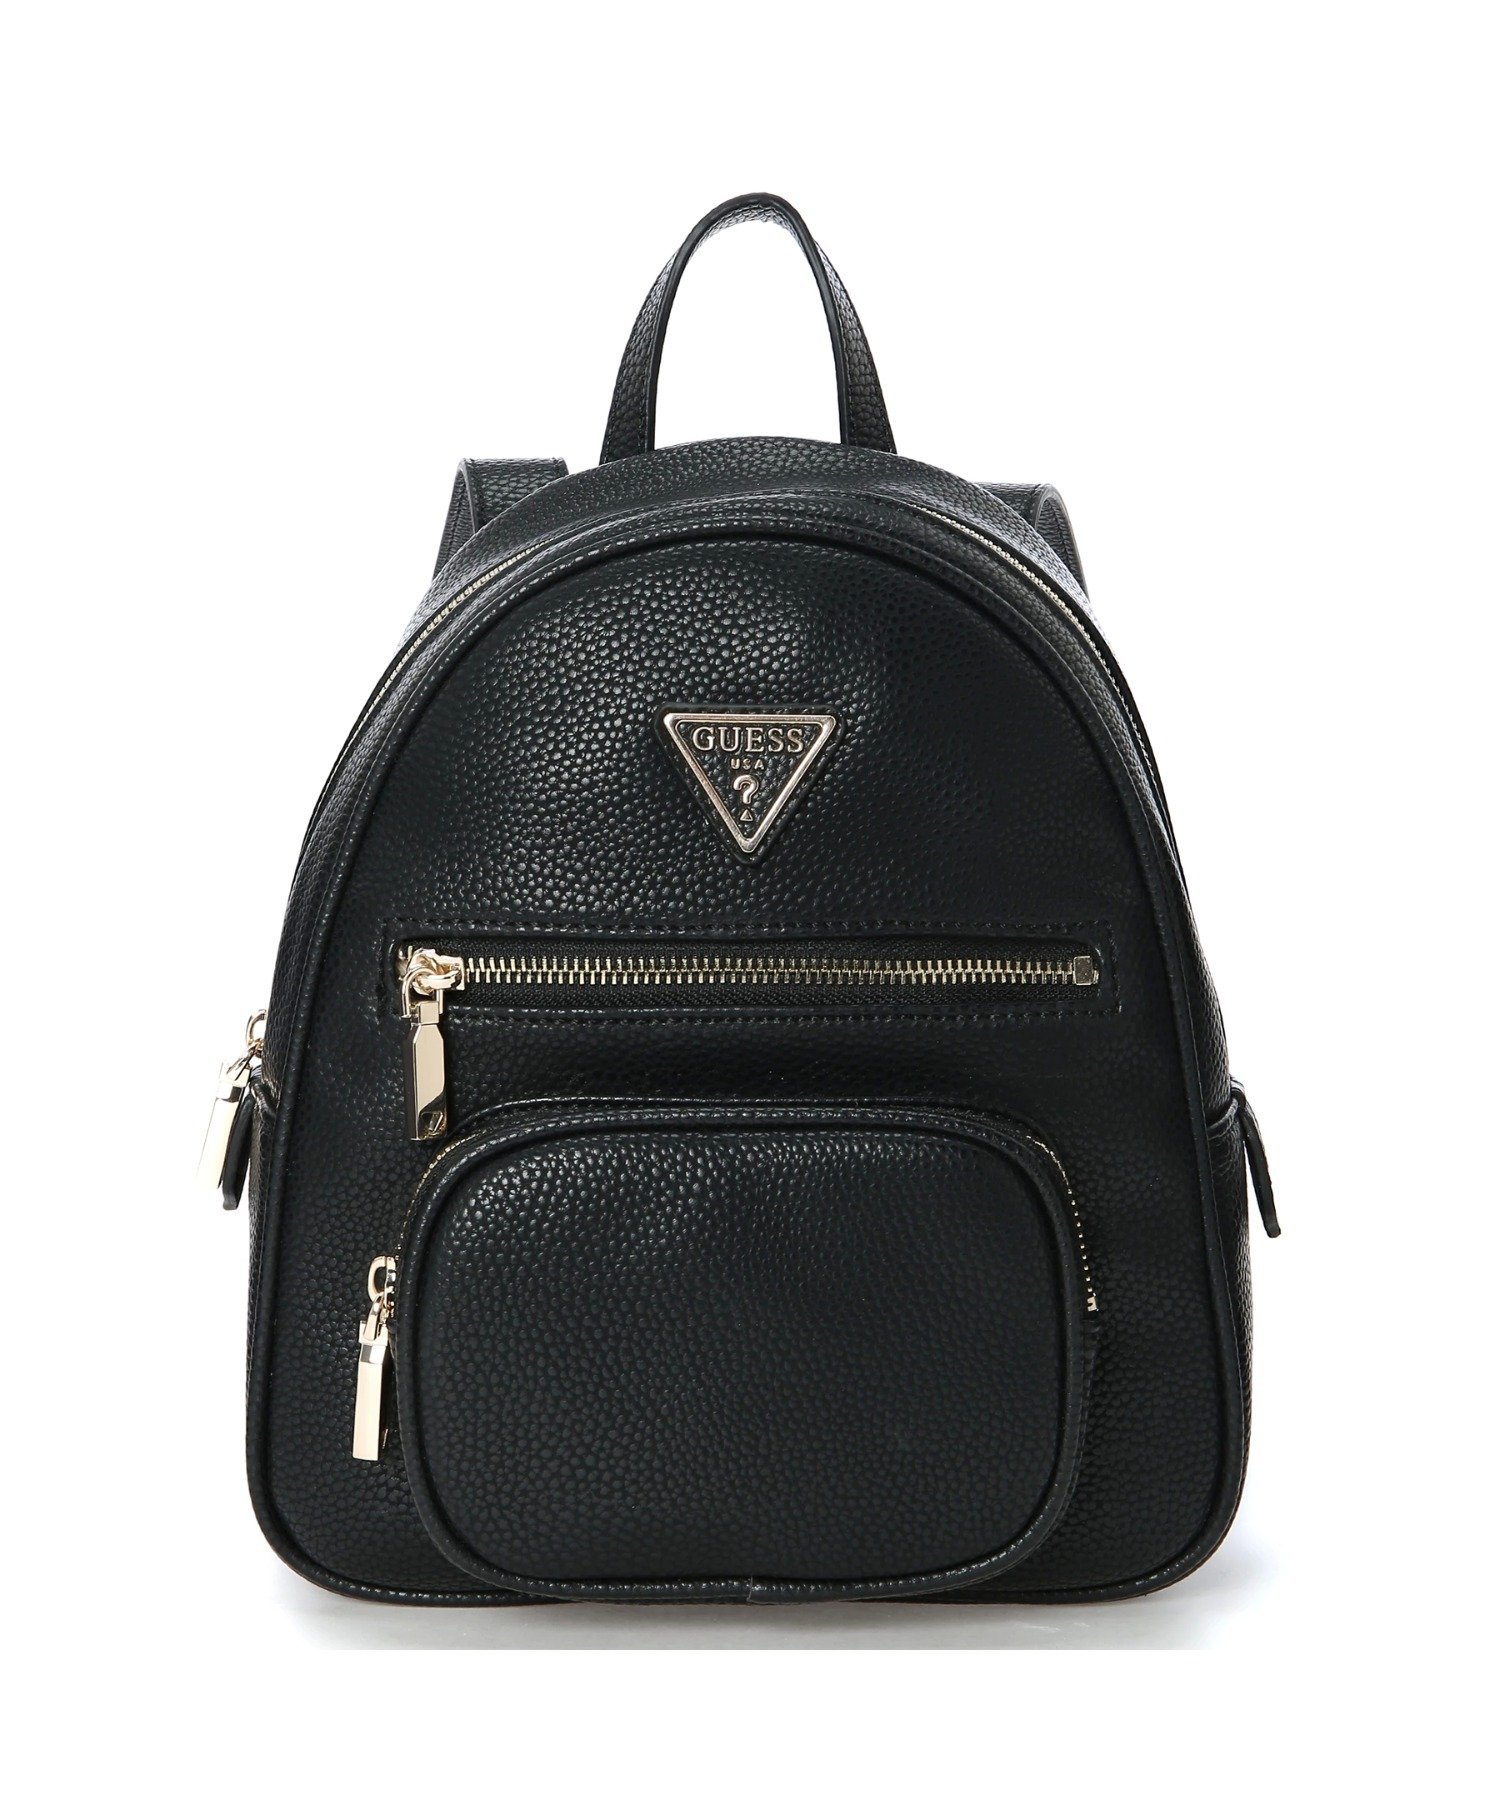 GUESS GUESS bNTbN (W)ECO ELEMENTS Small Backpack QX obO bNEobNpbN ubNyz